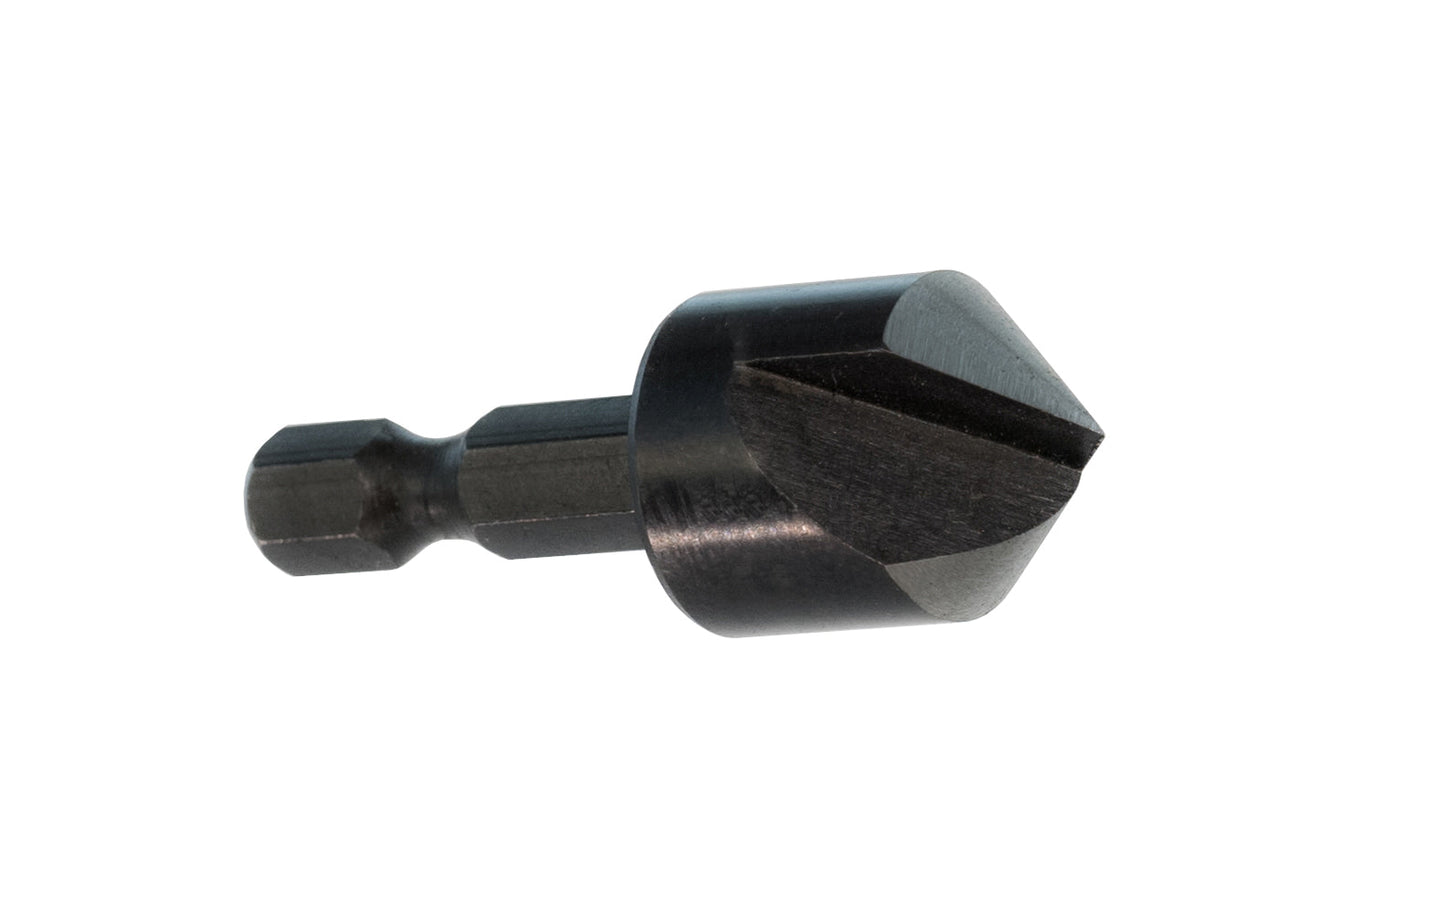 Insty-Bit 100 degrees tool steel countersink - Hex shank. Designed for chamferring holes in wood, metal, plastics & composites. 5/8" diameter body produces clean & burr-free edges. 100° countersink Made in USA.